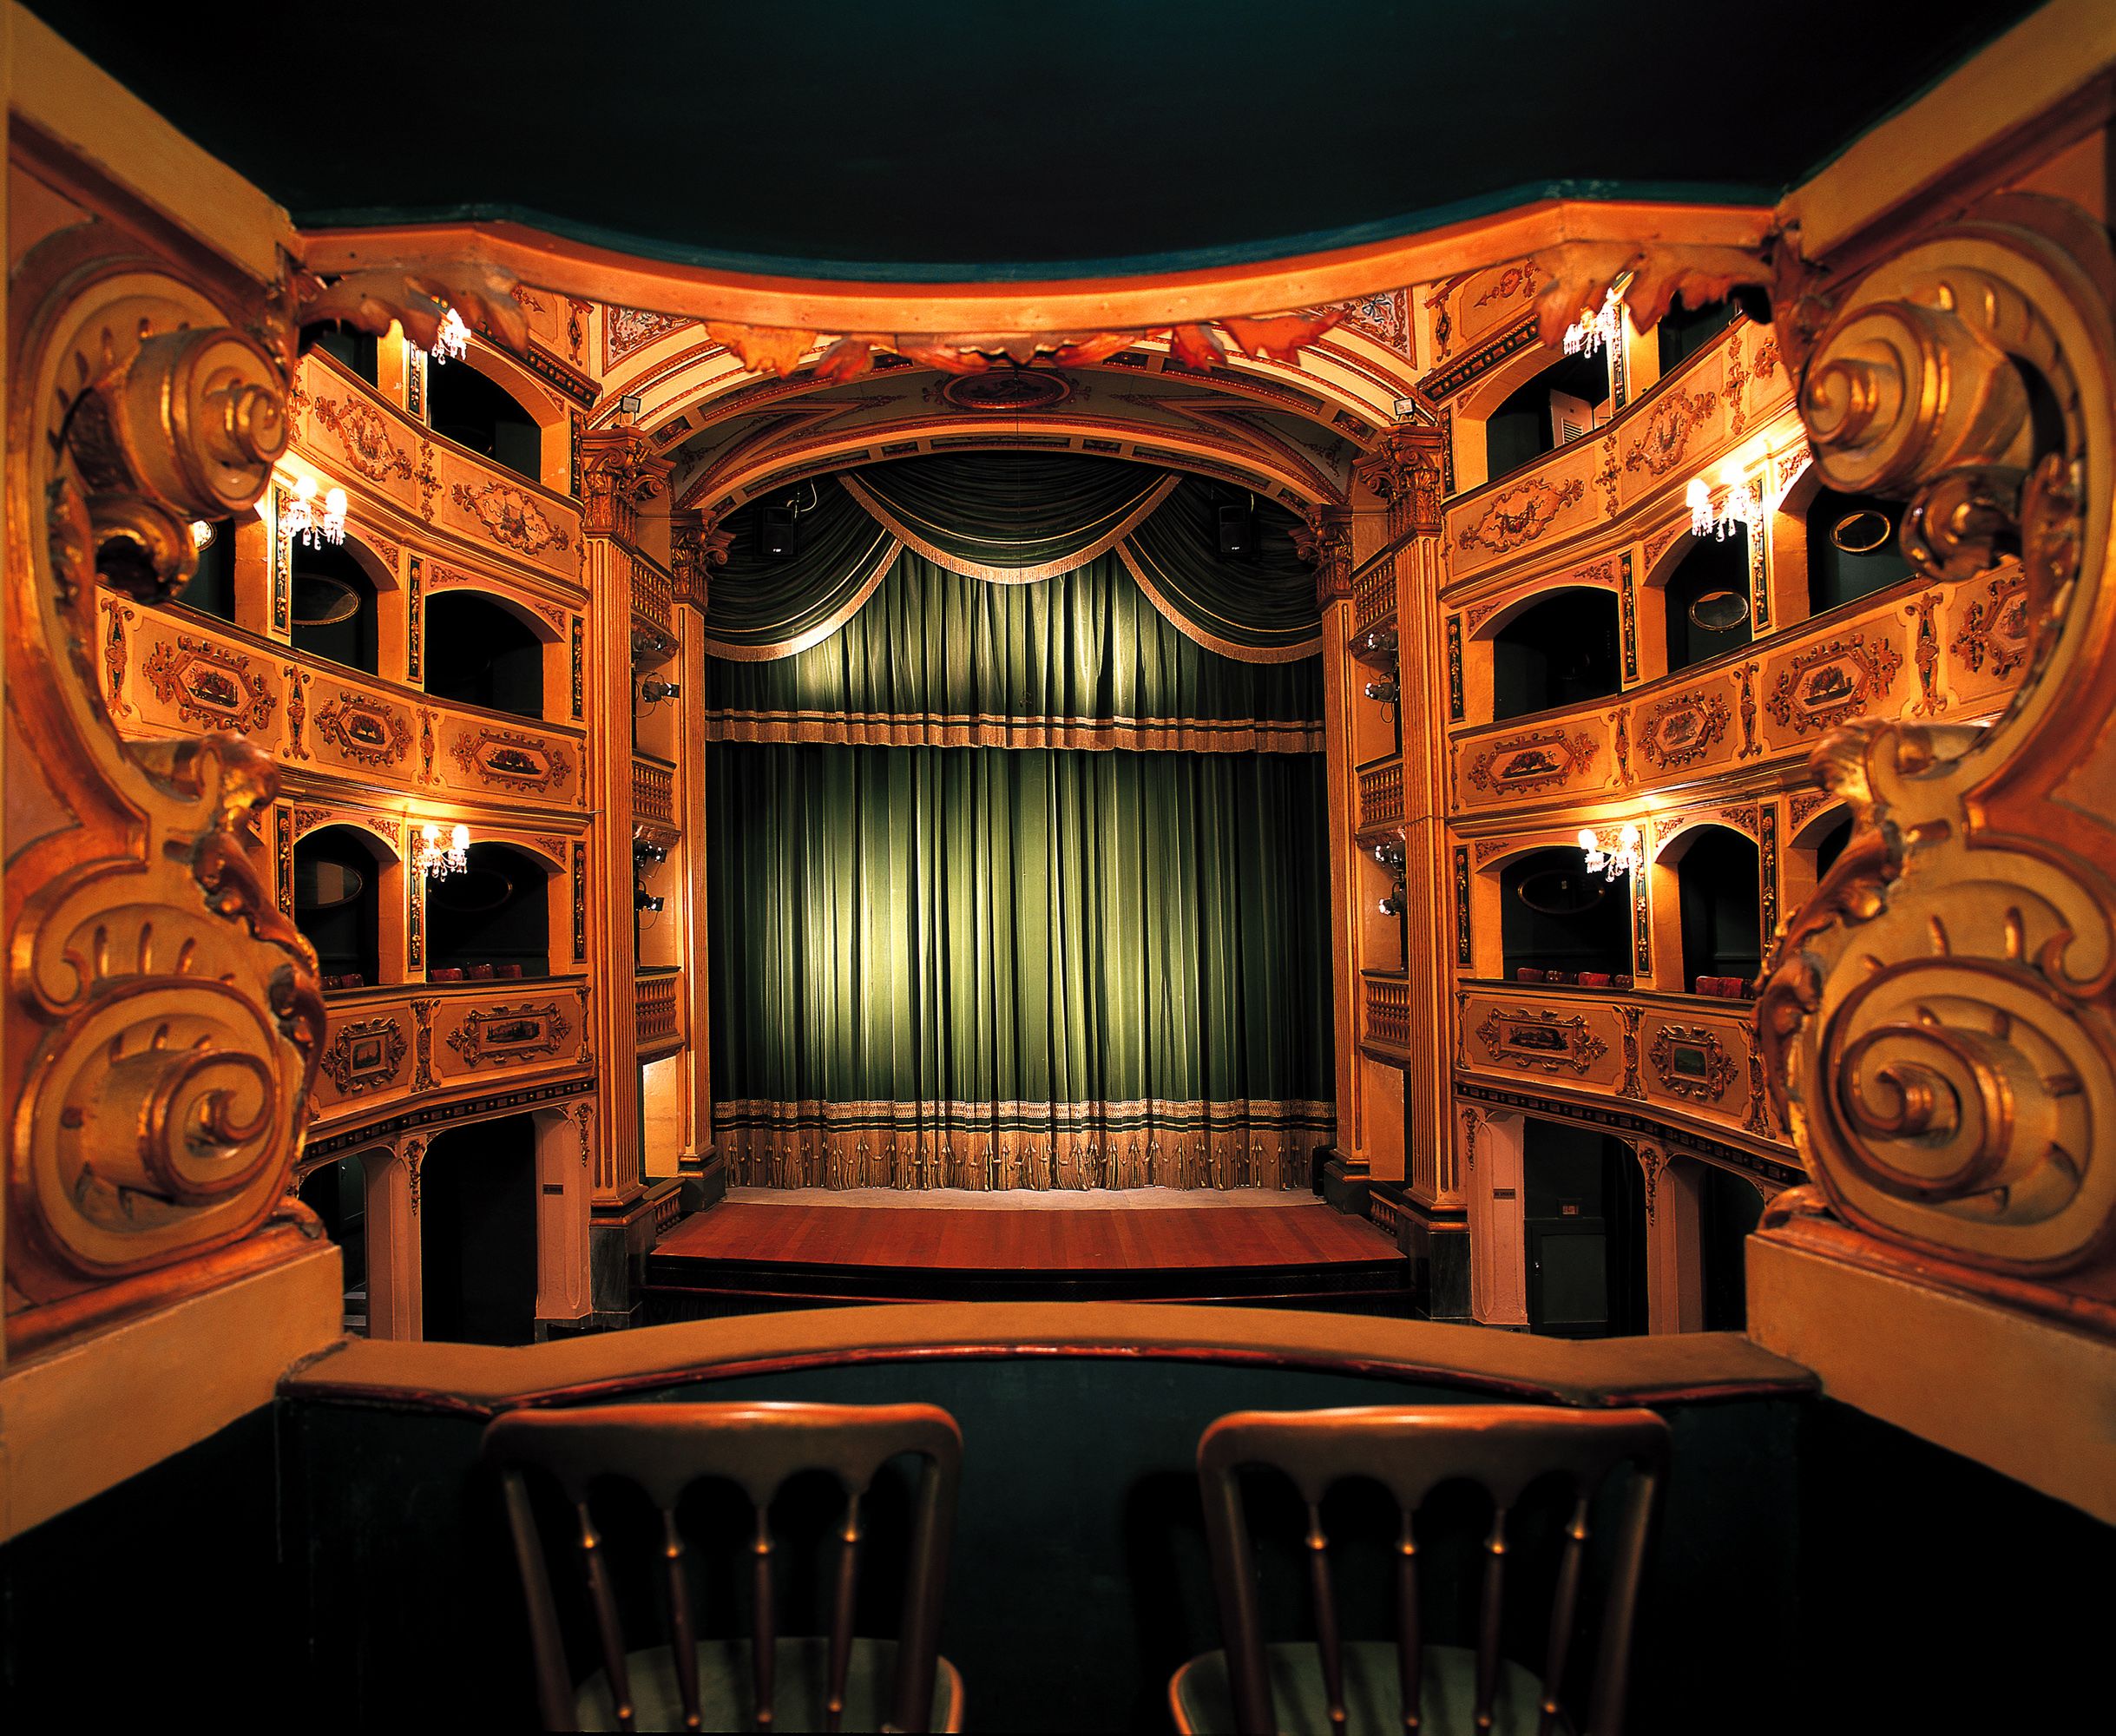 PHOTOS: 13 of the World's Most Spectacular Theaters